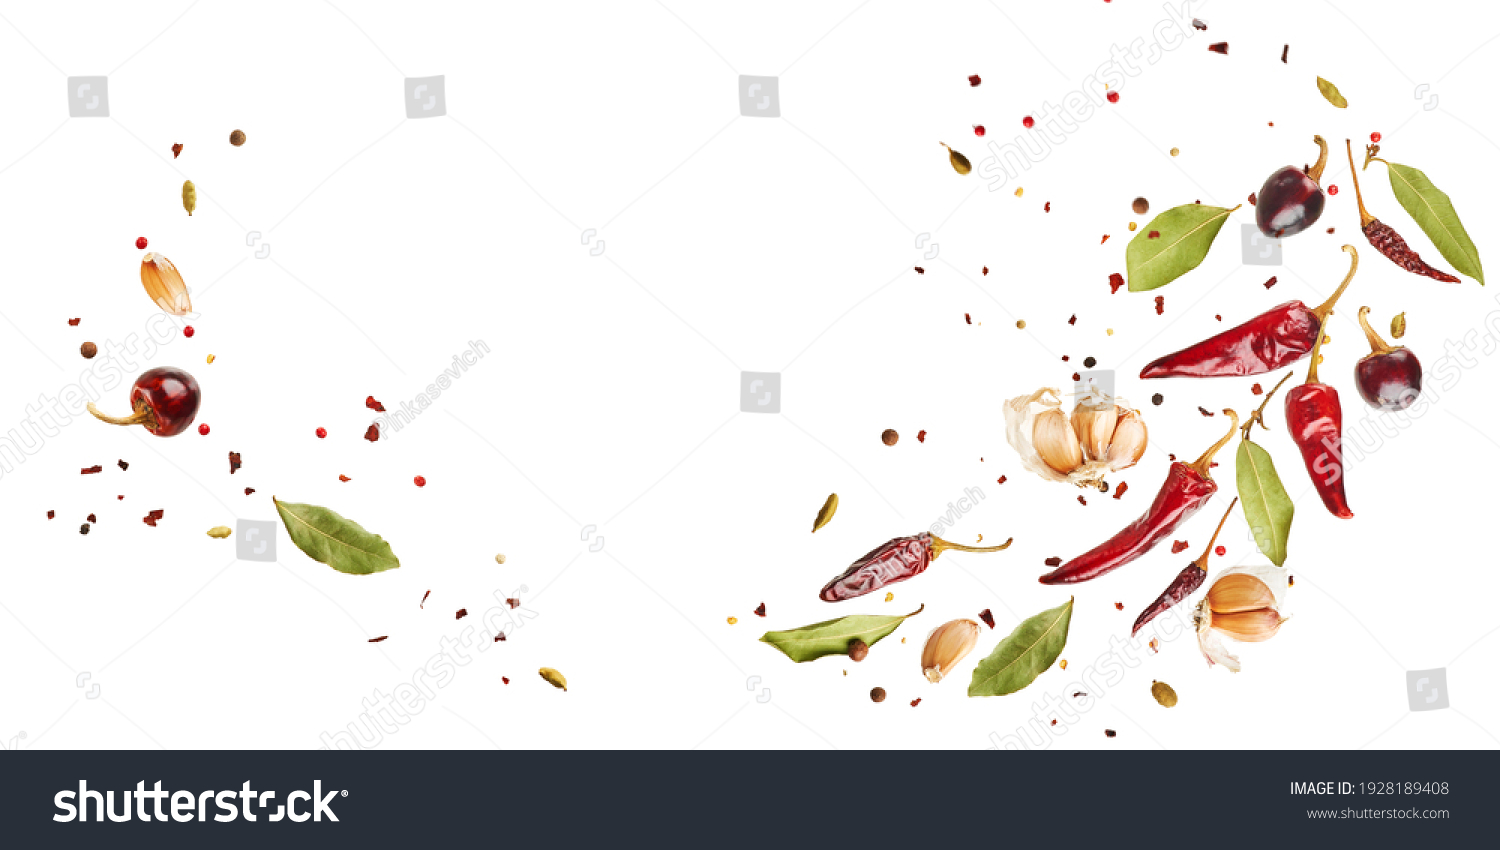 Flying set of colorful spices peppers, chili, garlic, laurel leaf, herbs in the air isolated on white background. Food and cuisine ingredients wide banner, top view, with copy space.  #1928189408